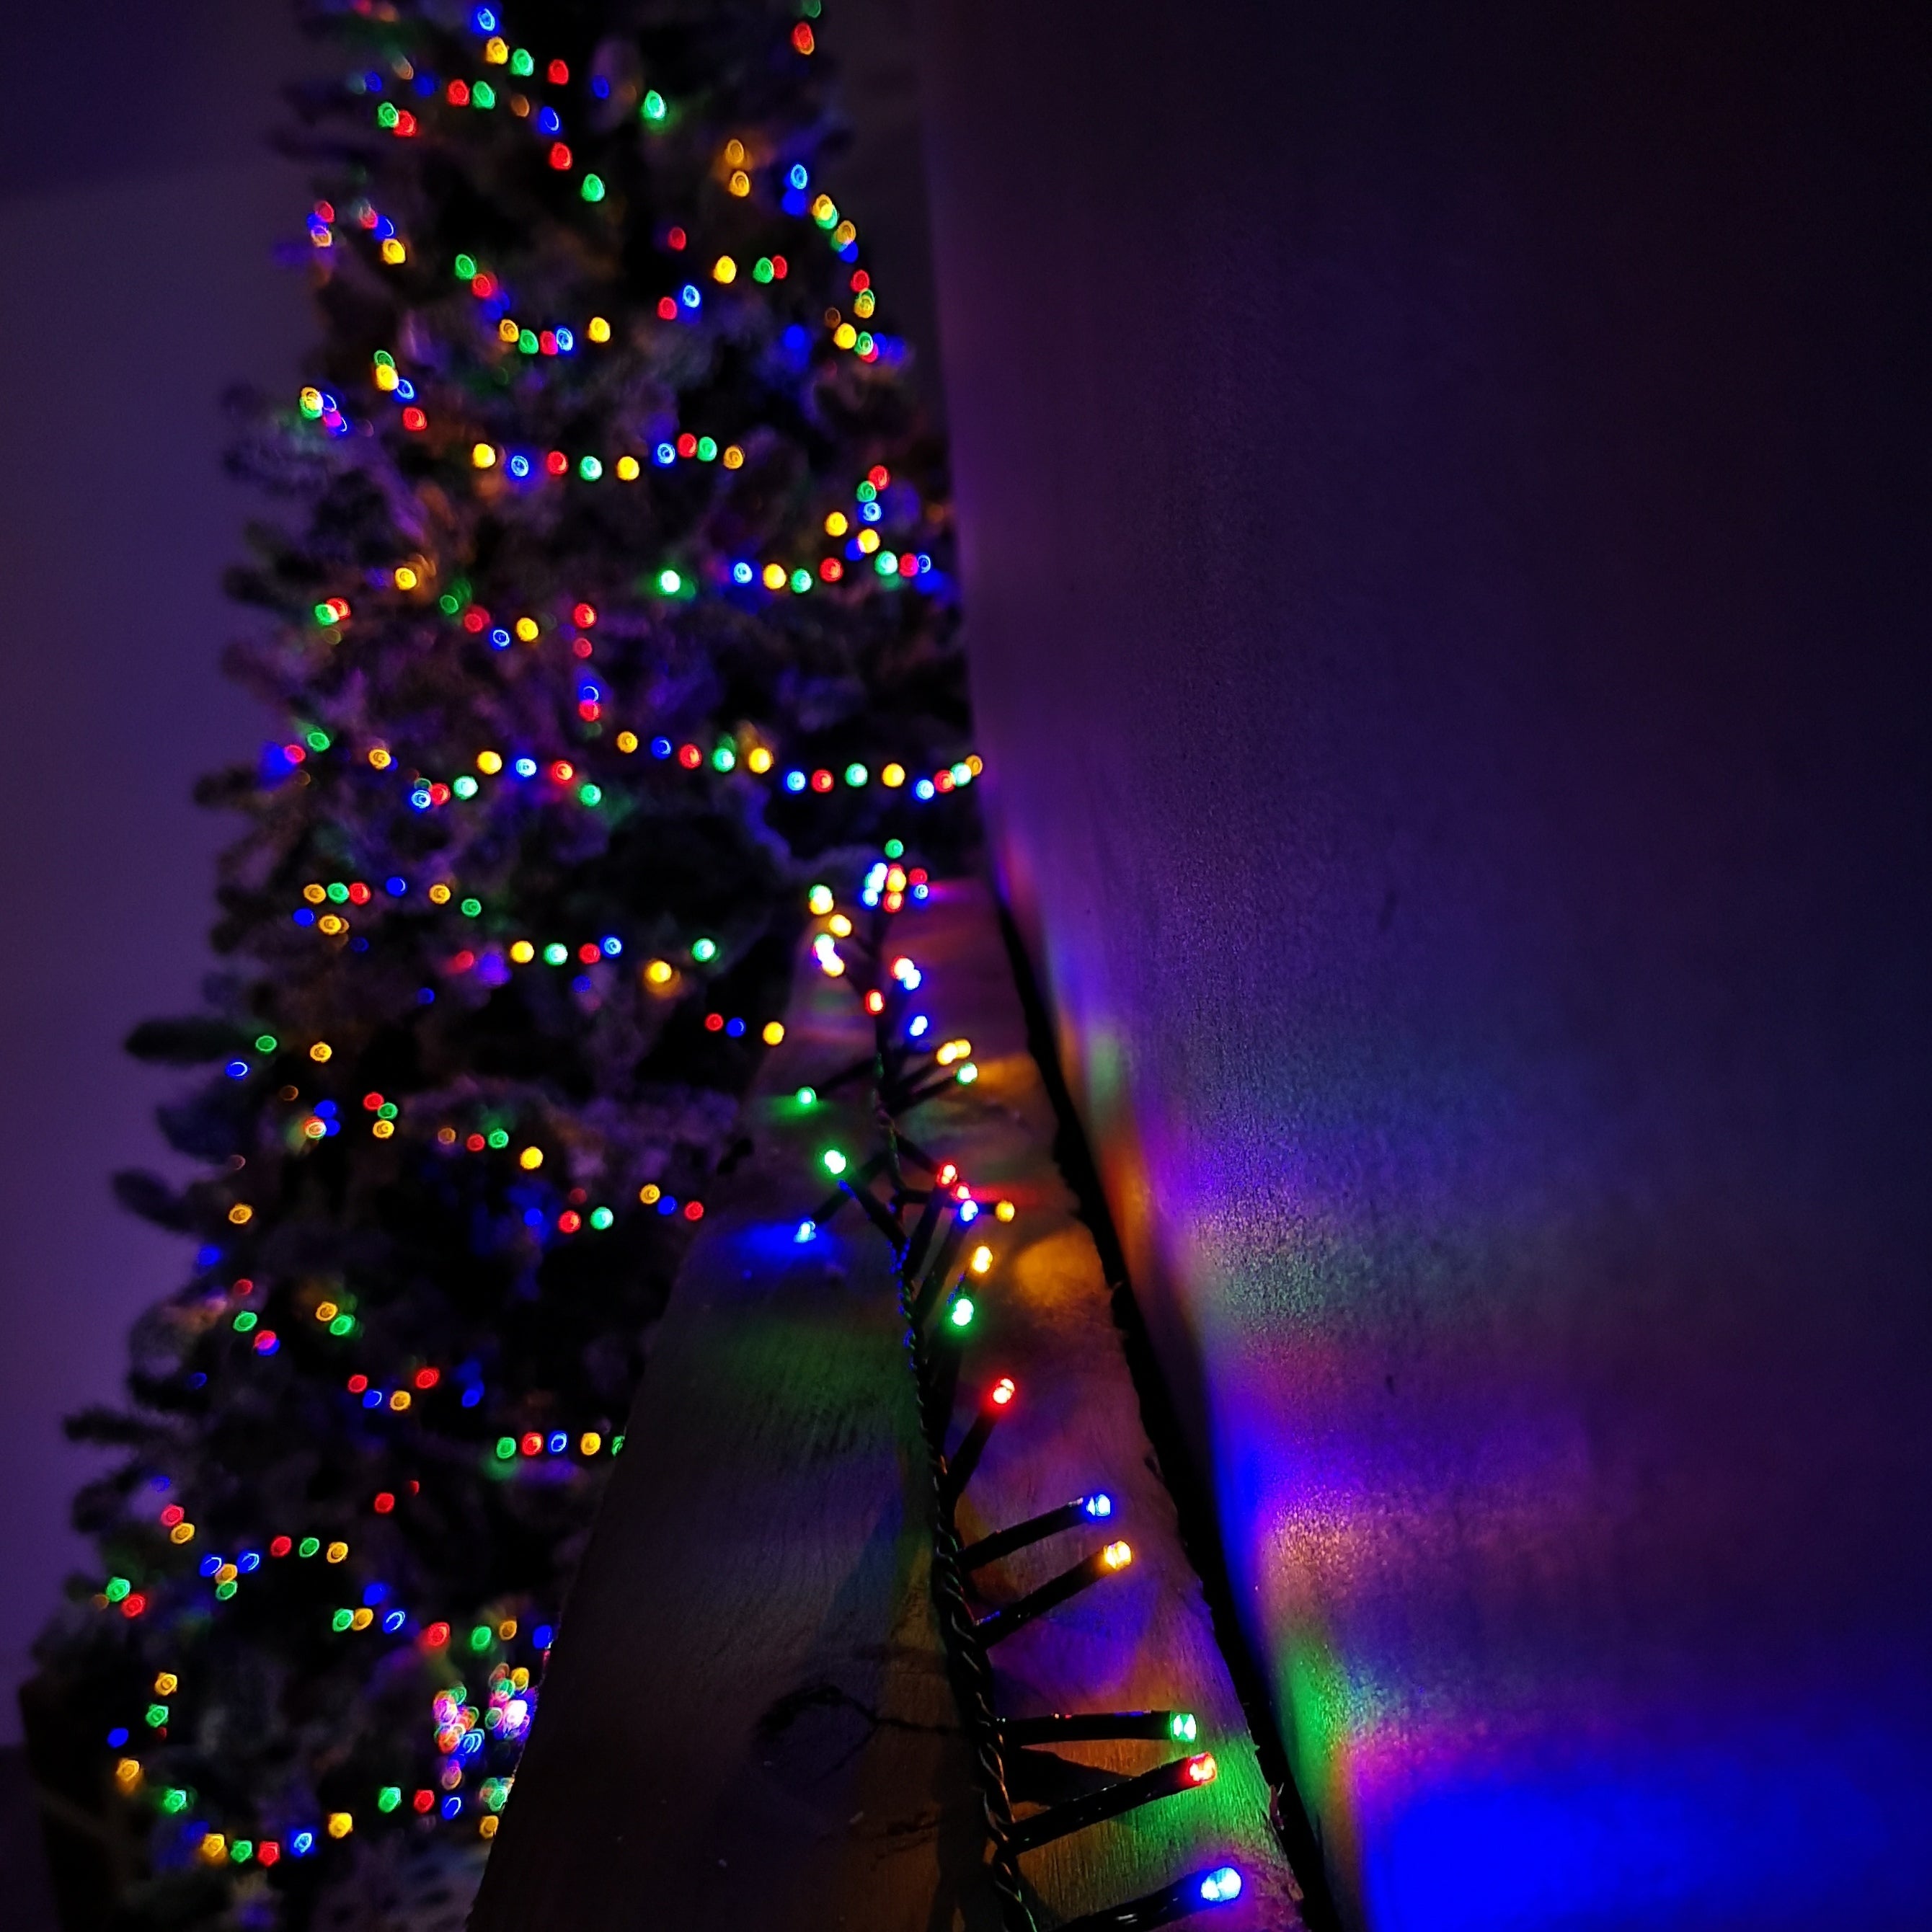 125m Treebrights Christmas Lights with 5000 LEDs in Multi-Coloured with Timer